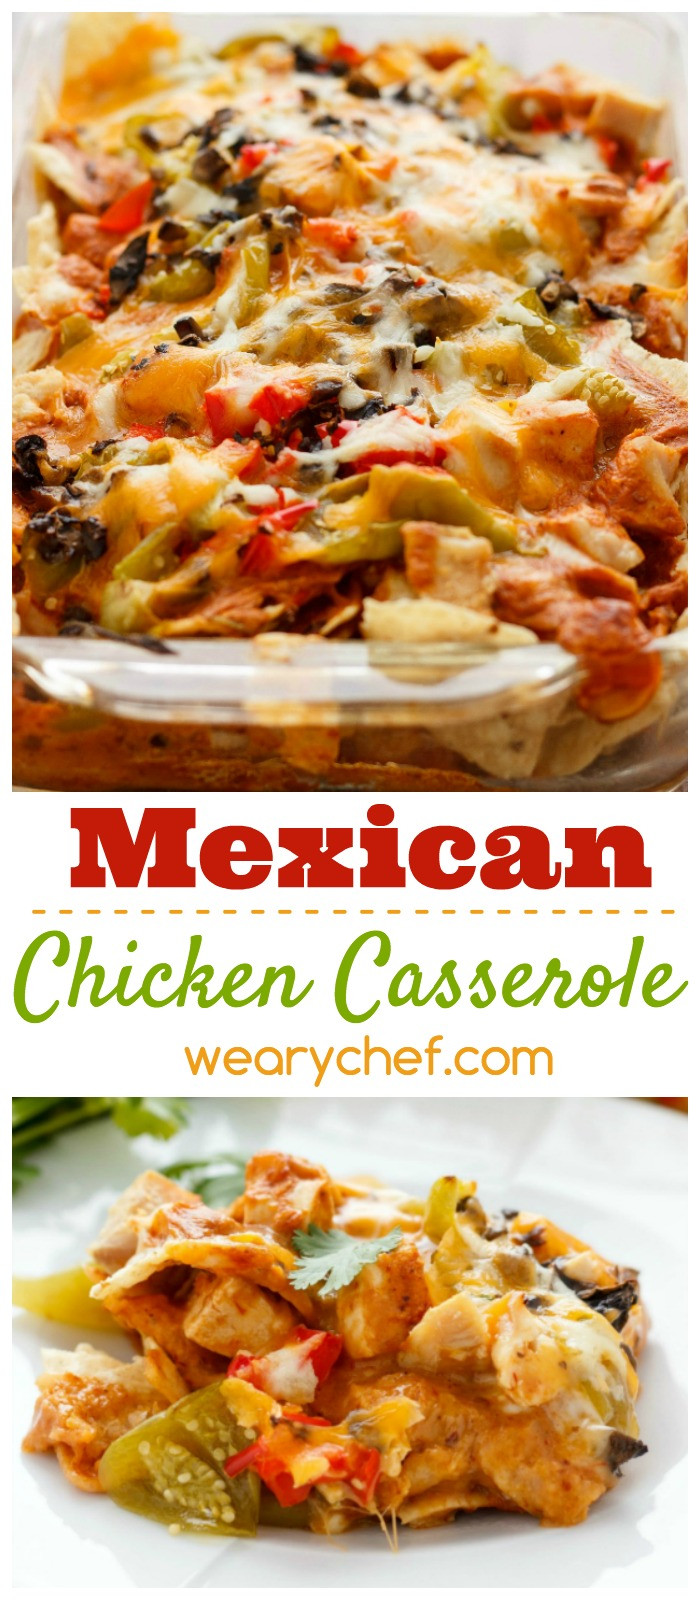 Mexican Chicken Casserole With Tortilla Chips
 Mexican Chicken Casserole with Tortilla Chips The Weary Chef